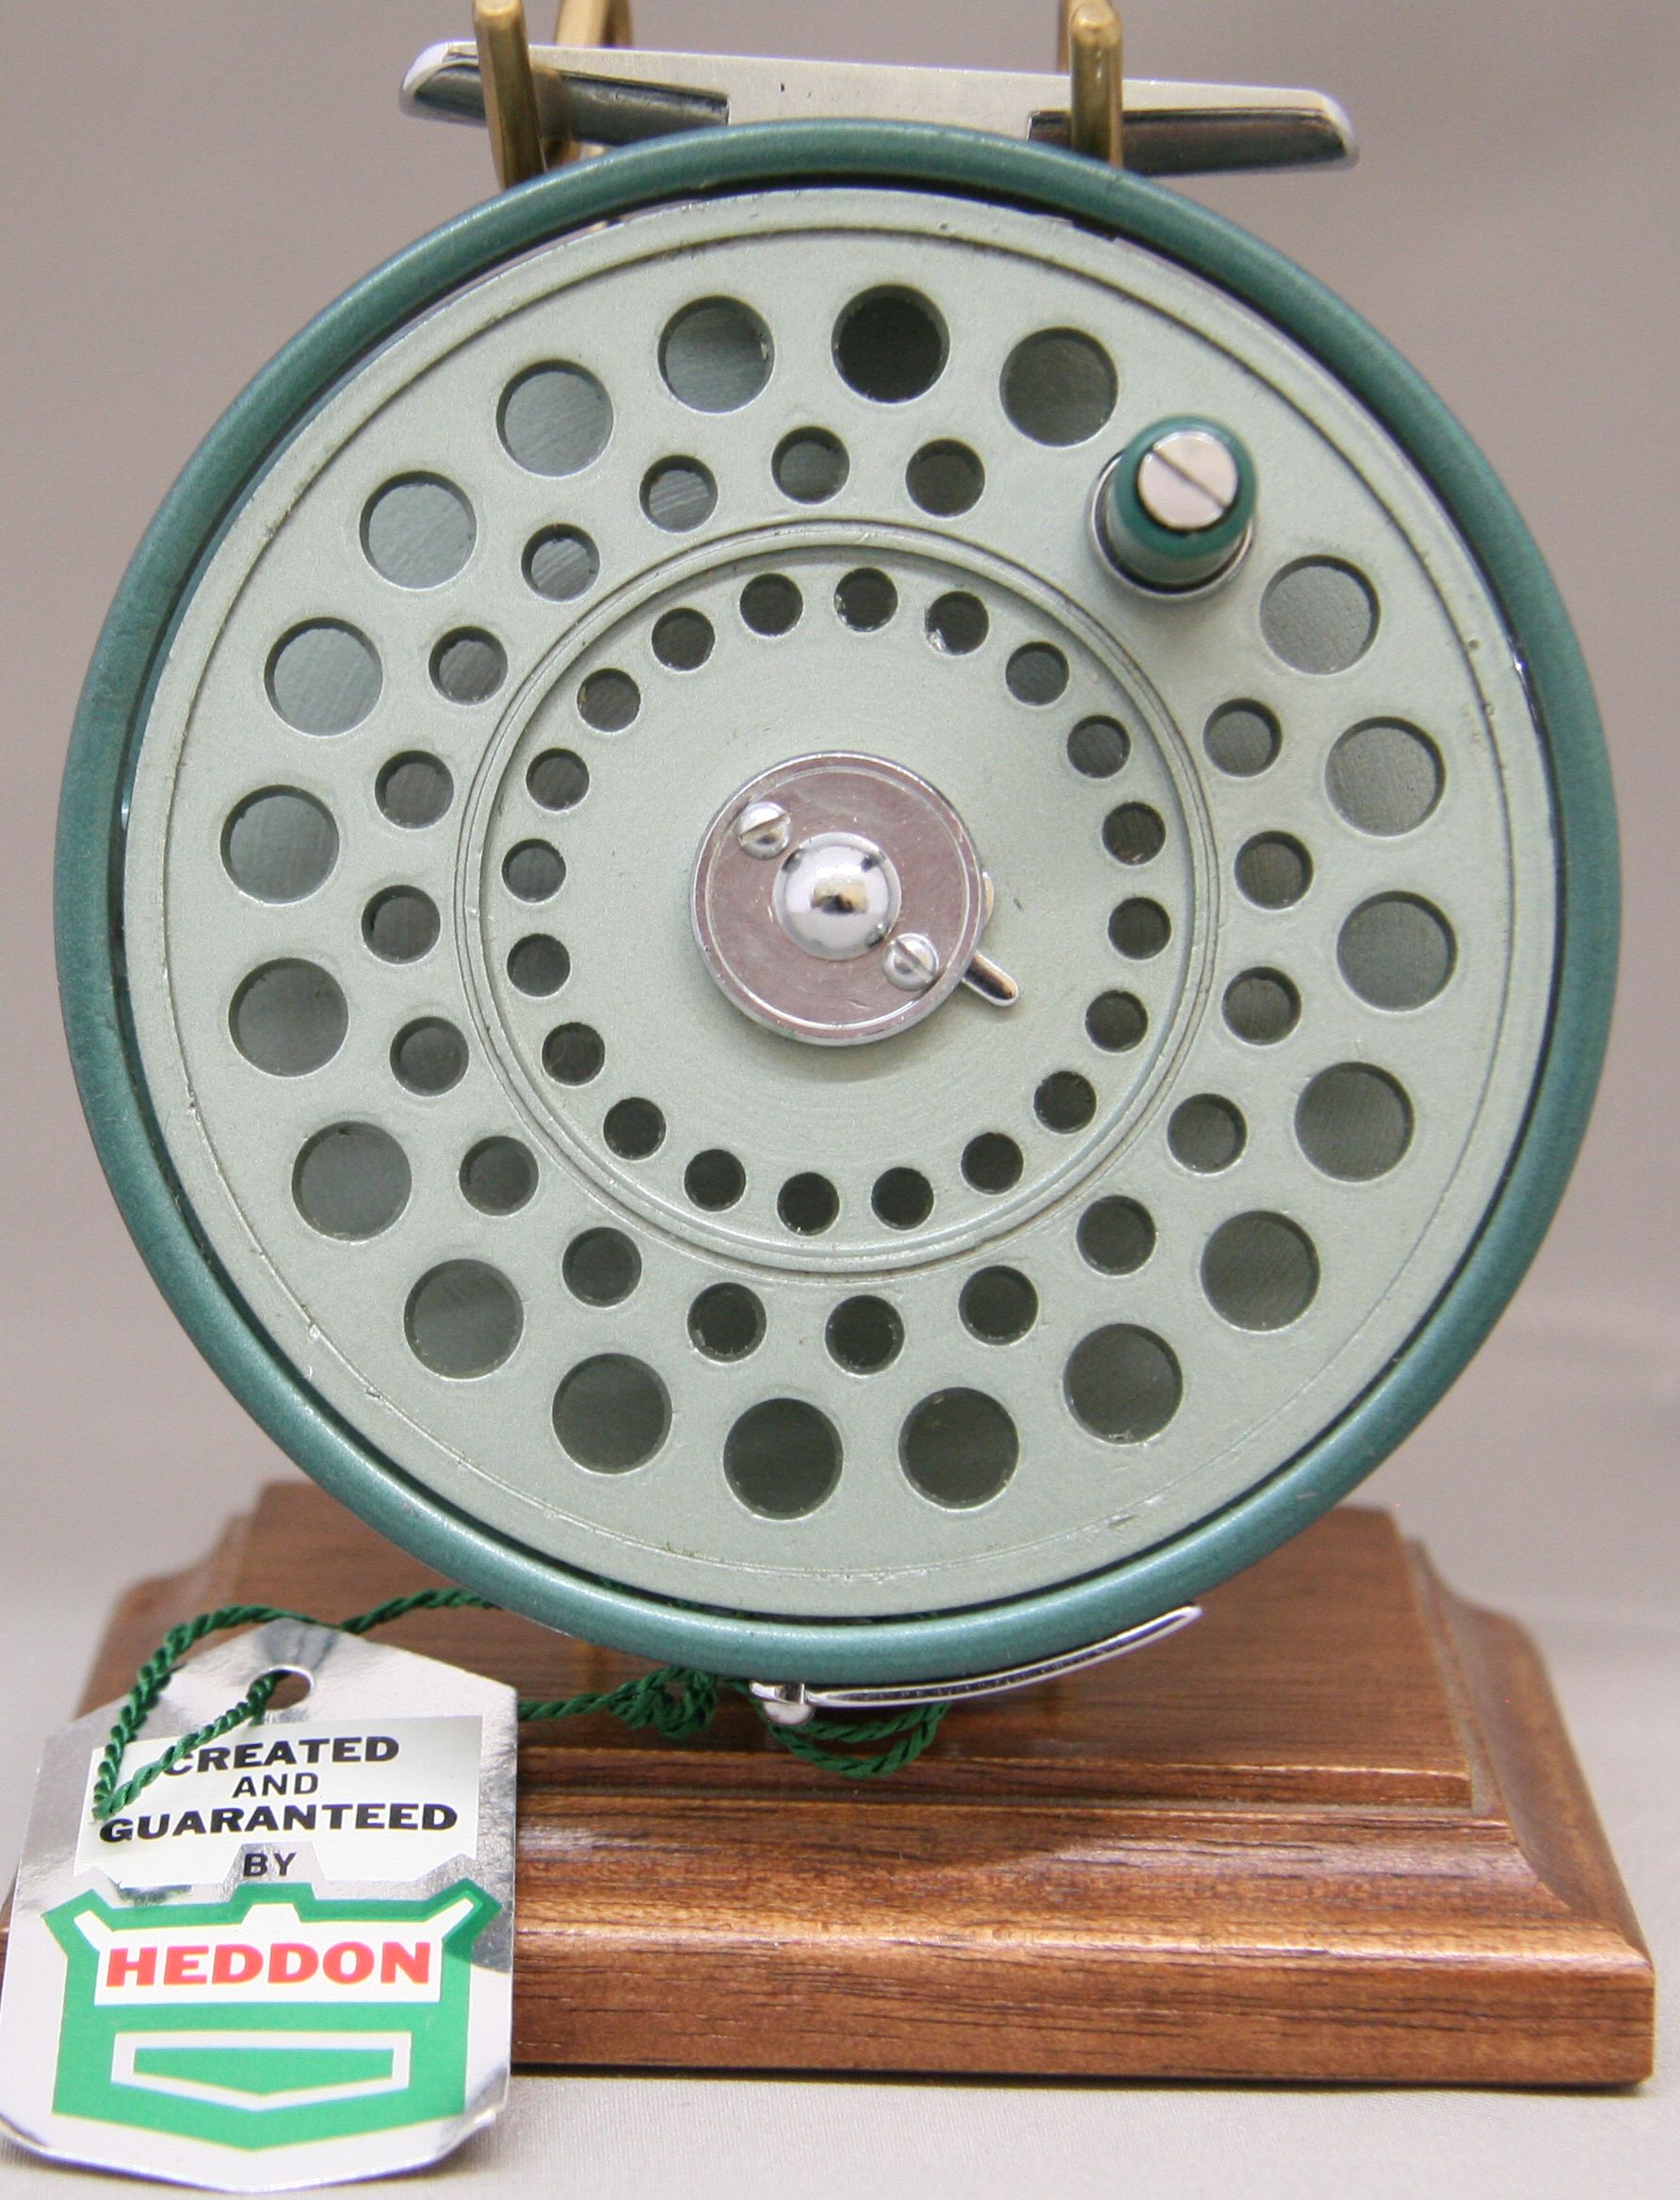 Product Details - Rick's Rods Vintage Fly Fishing Rods, Reels, and Tackle @  Denver, Colorado